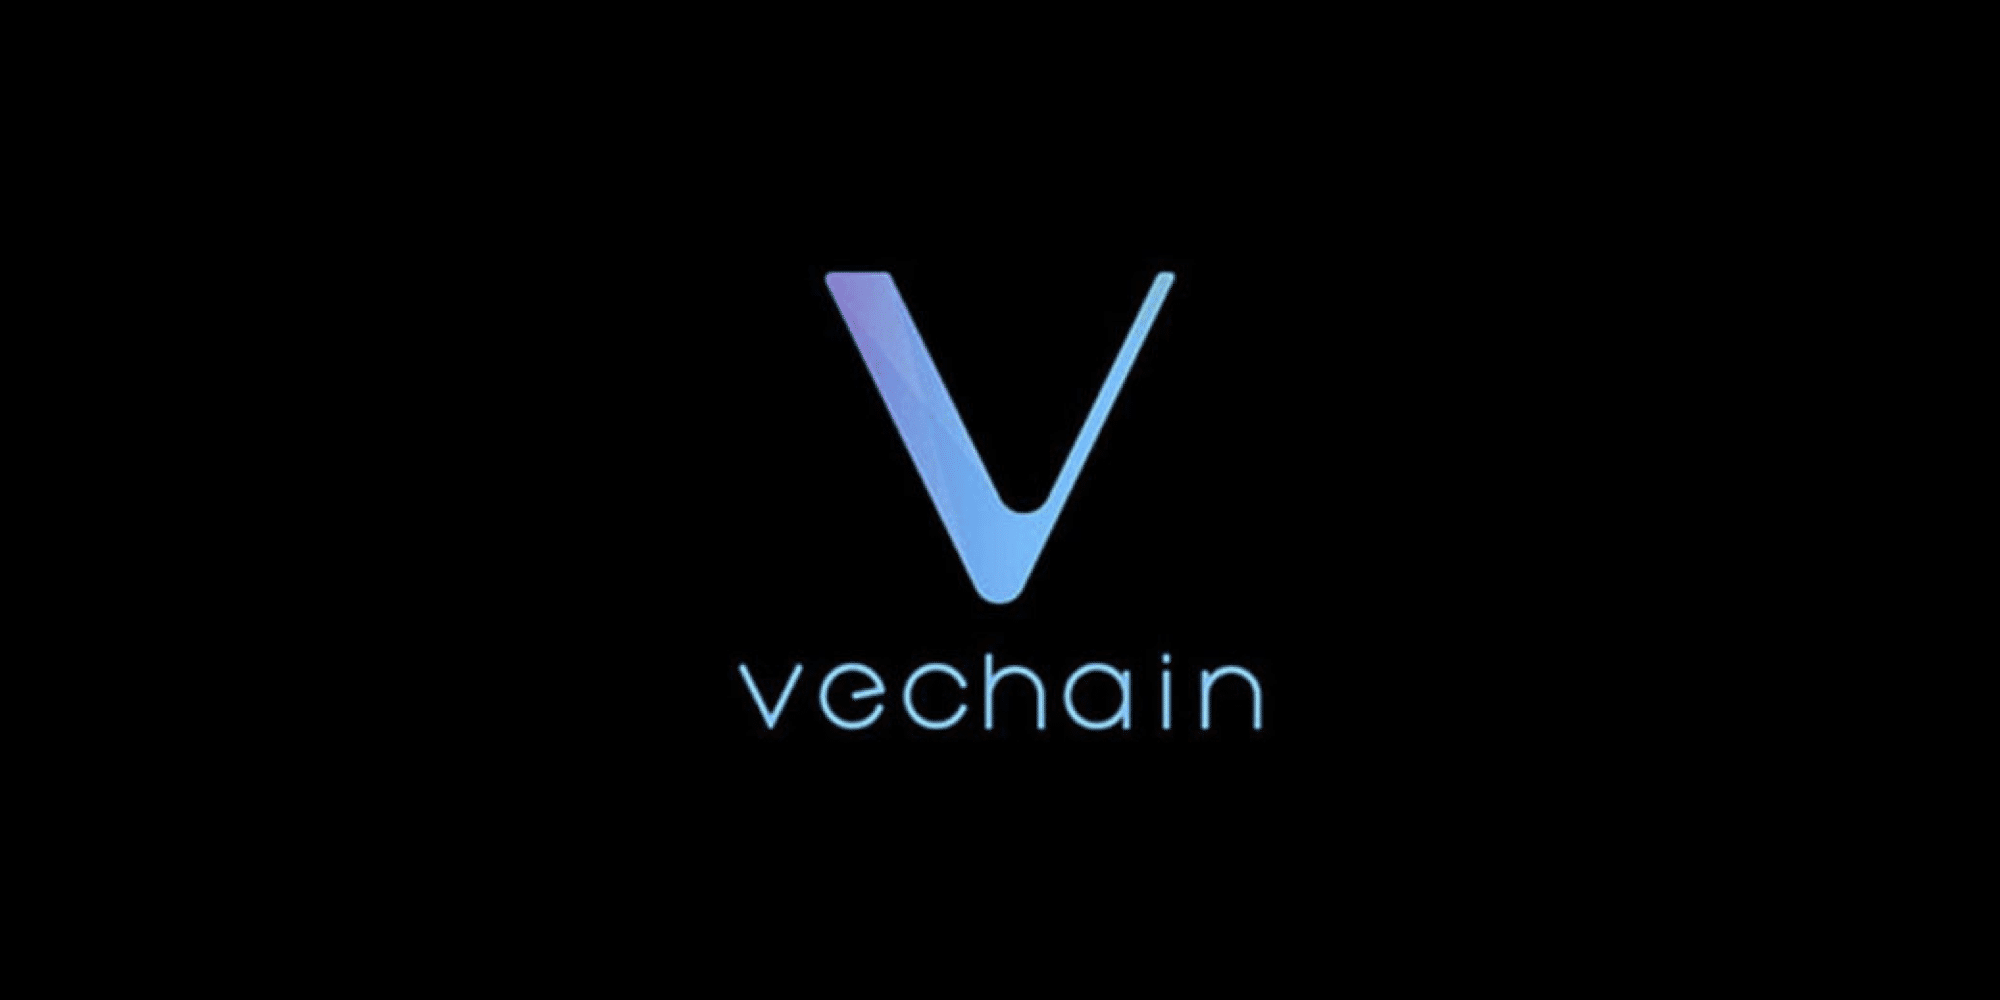 Vechain Logo - What is VeChain (VET)? | The Ultimate Guide - CoinCentral